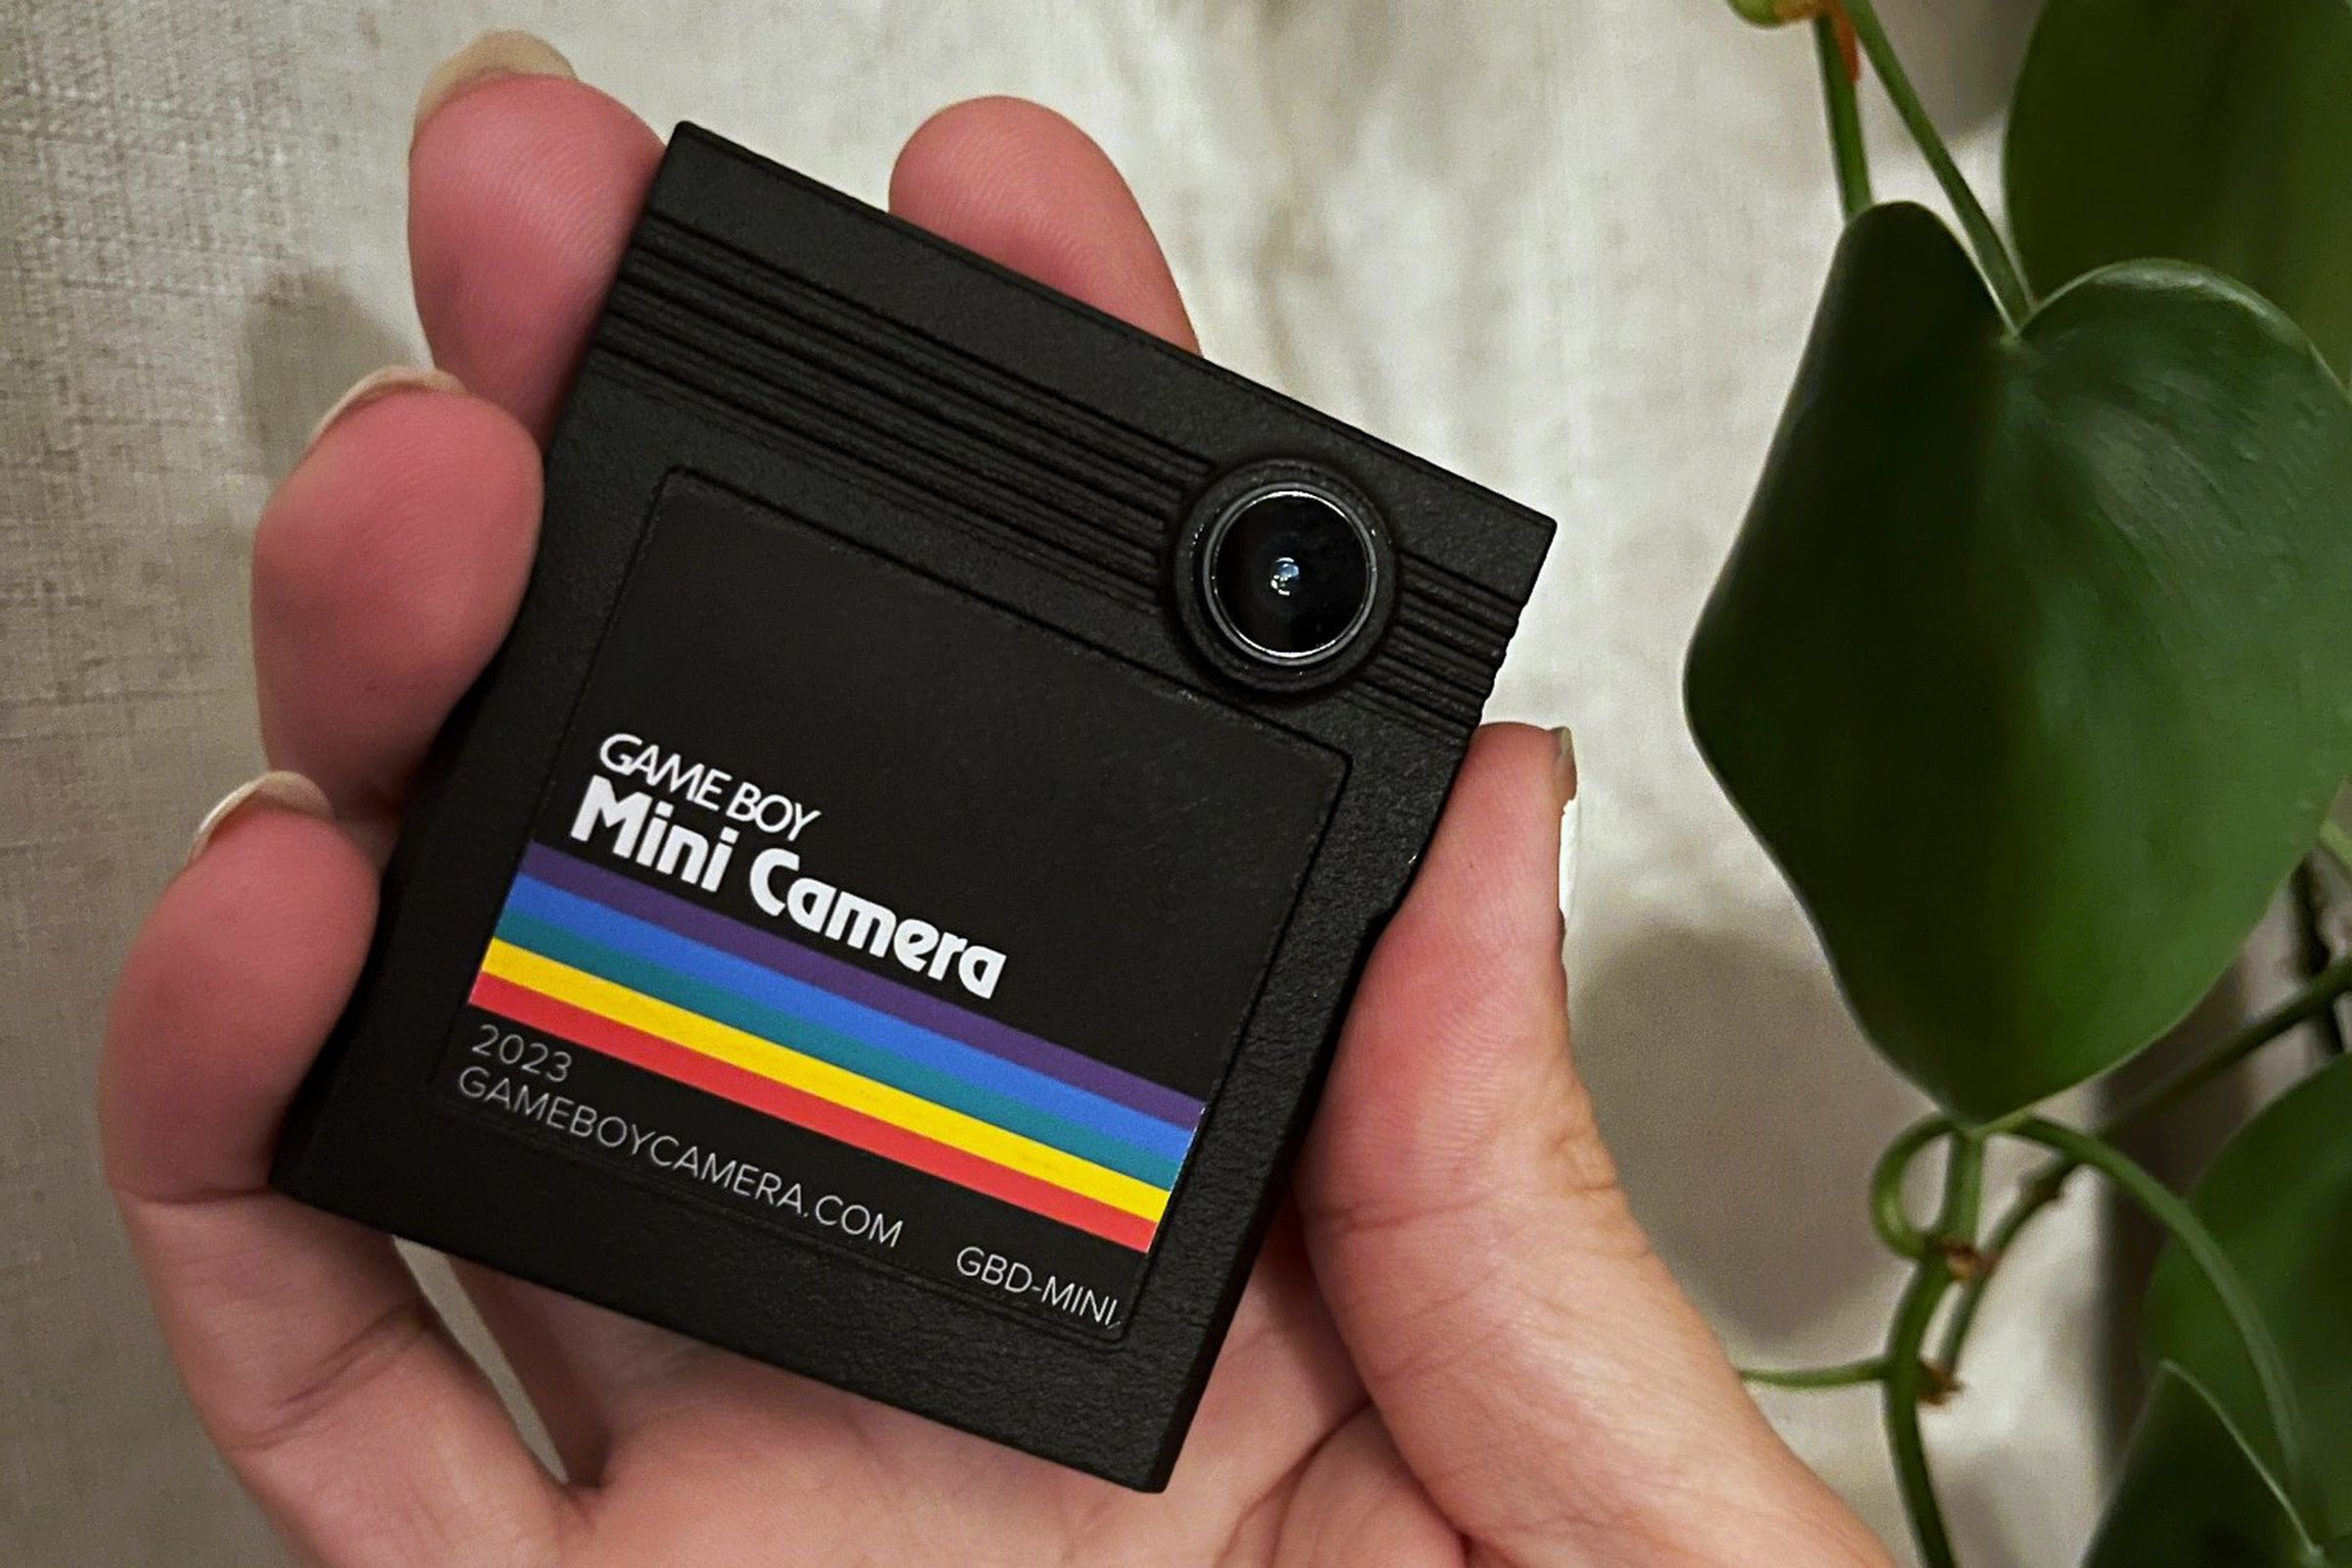 A black game boy cartridge with a rainbow stripe and an iphone lens sticking out.